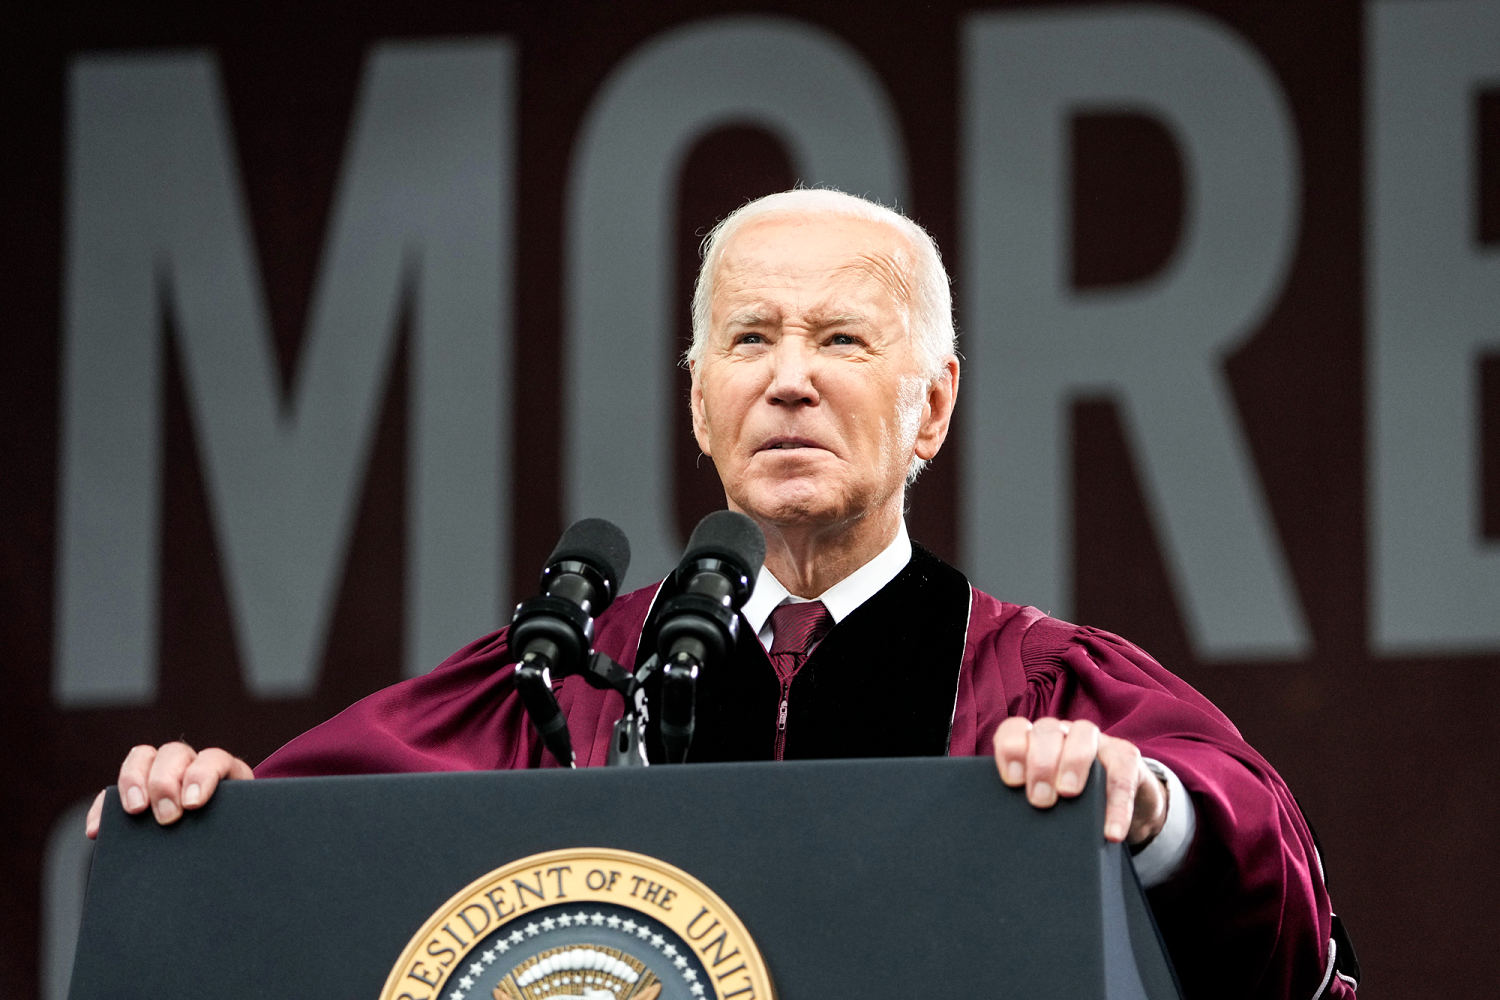 Biden delivers Morehouse commencement speech as some on campus express pro-Palestine messages